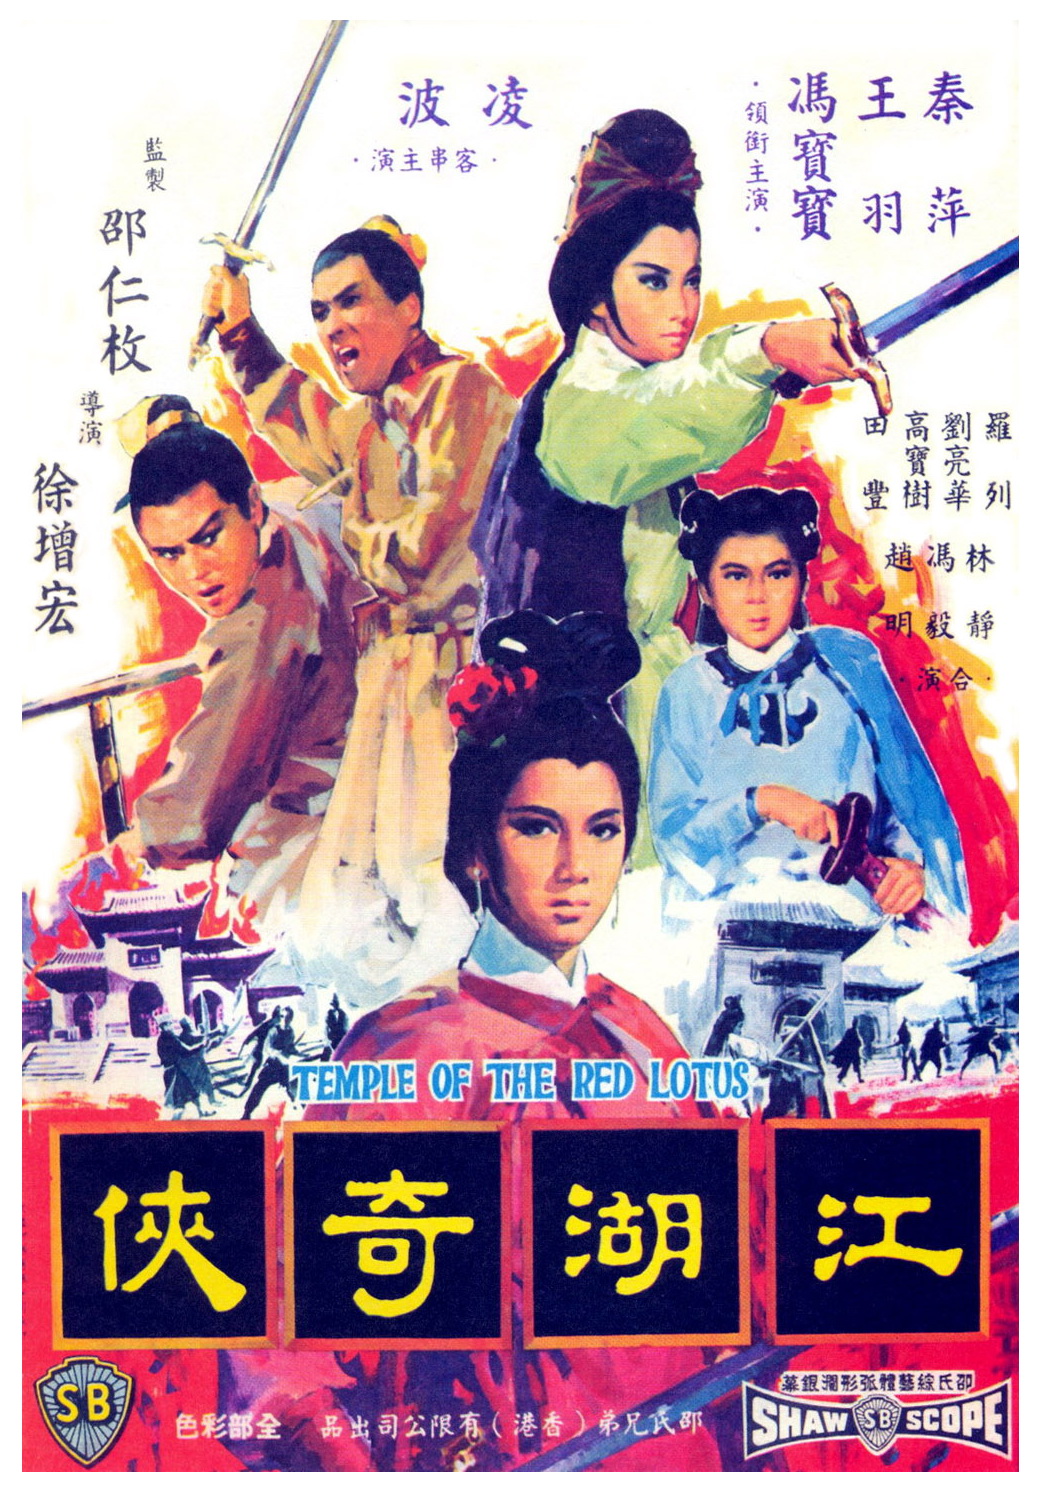 Temple of the Red Lotus (1965) Screenshot 2